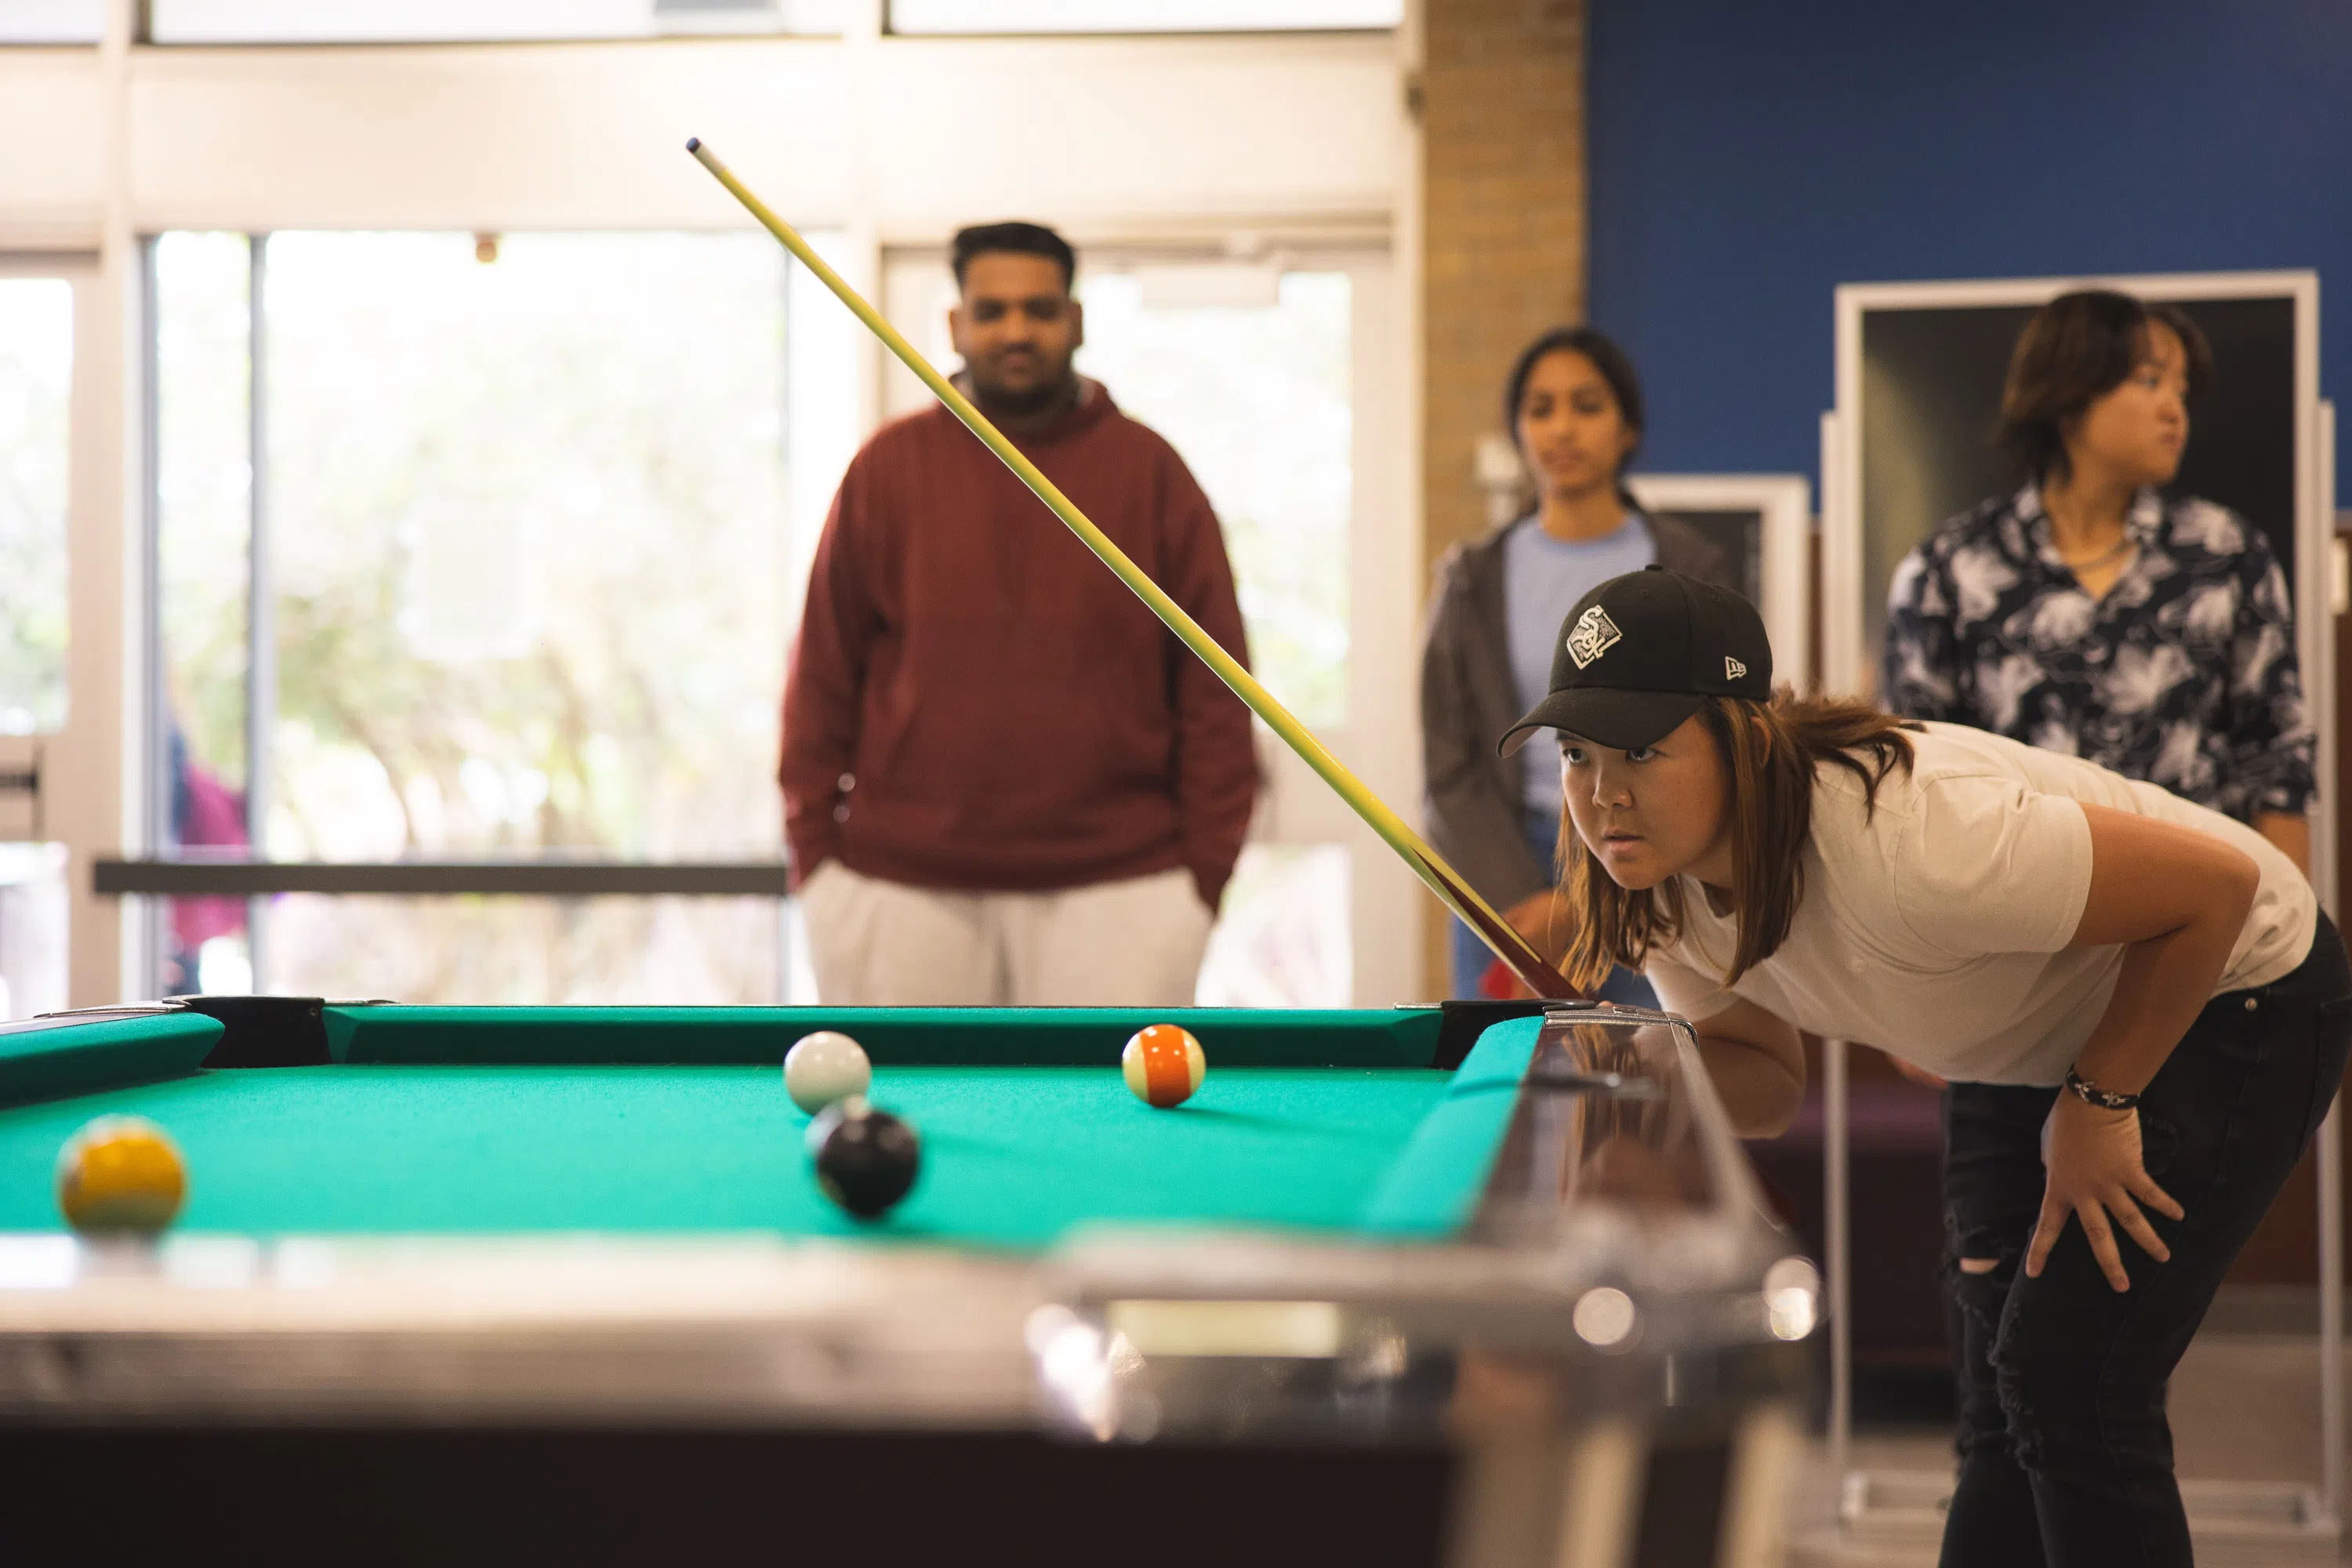 UWF students competed in the annual Pool Tournament in the University Commons.